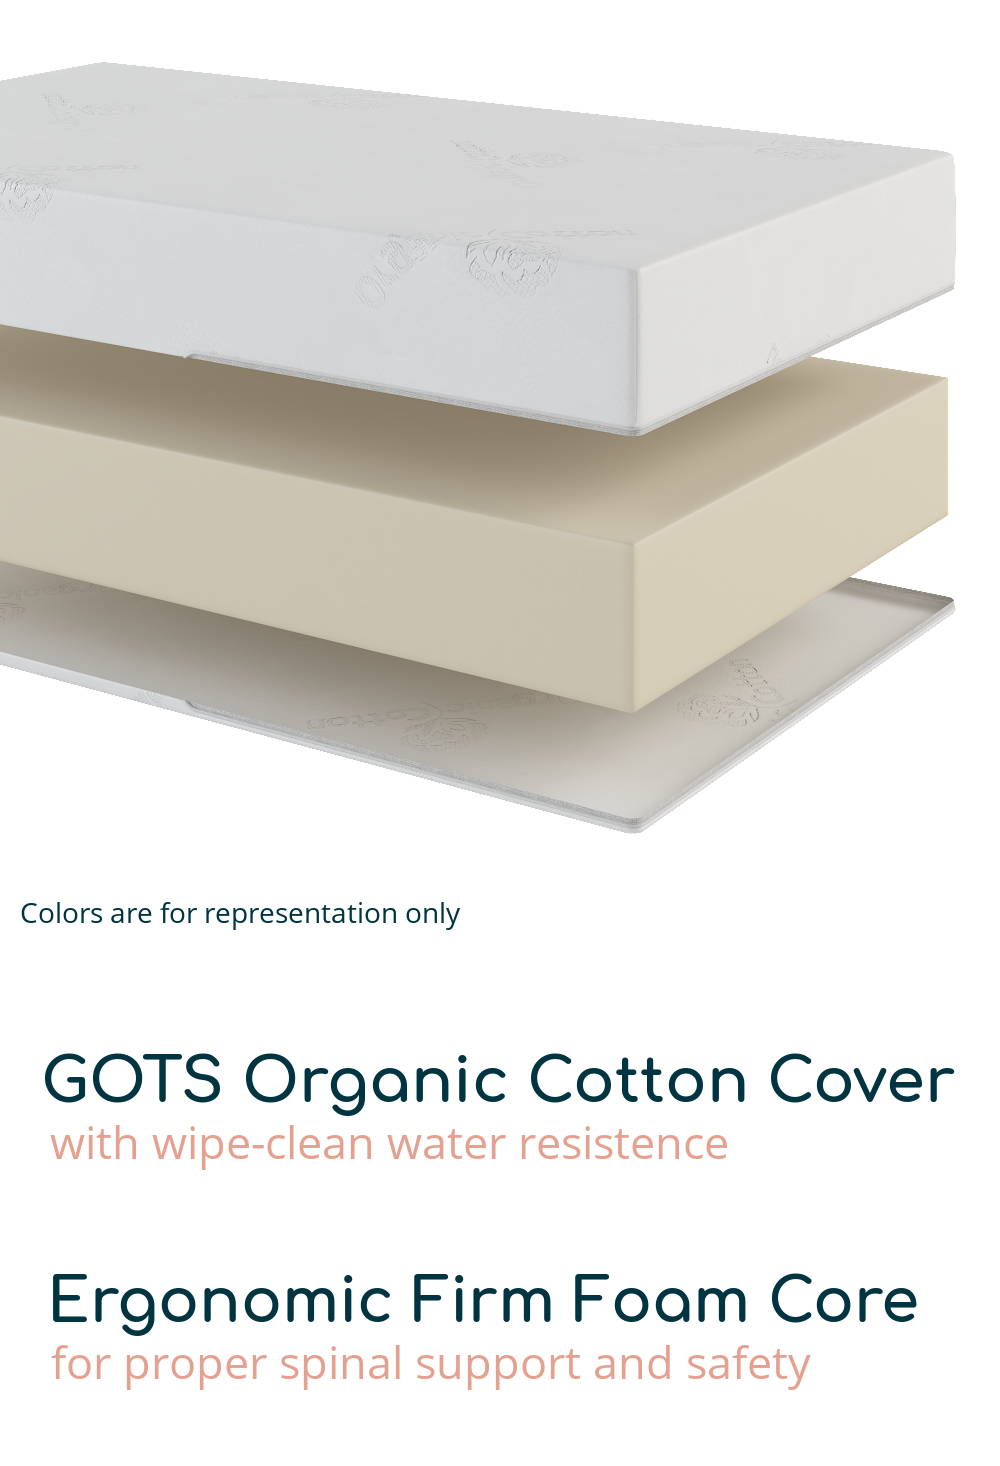 GOTS Organic Cotton Cover-with wipe clean resistance, Ergonomic Firm Foam Core-for proper spinal support and safety.